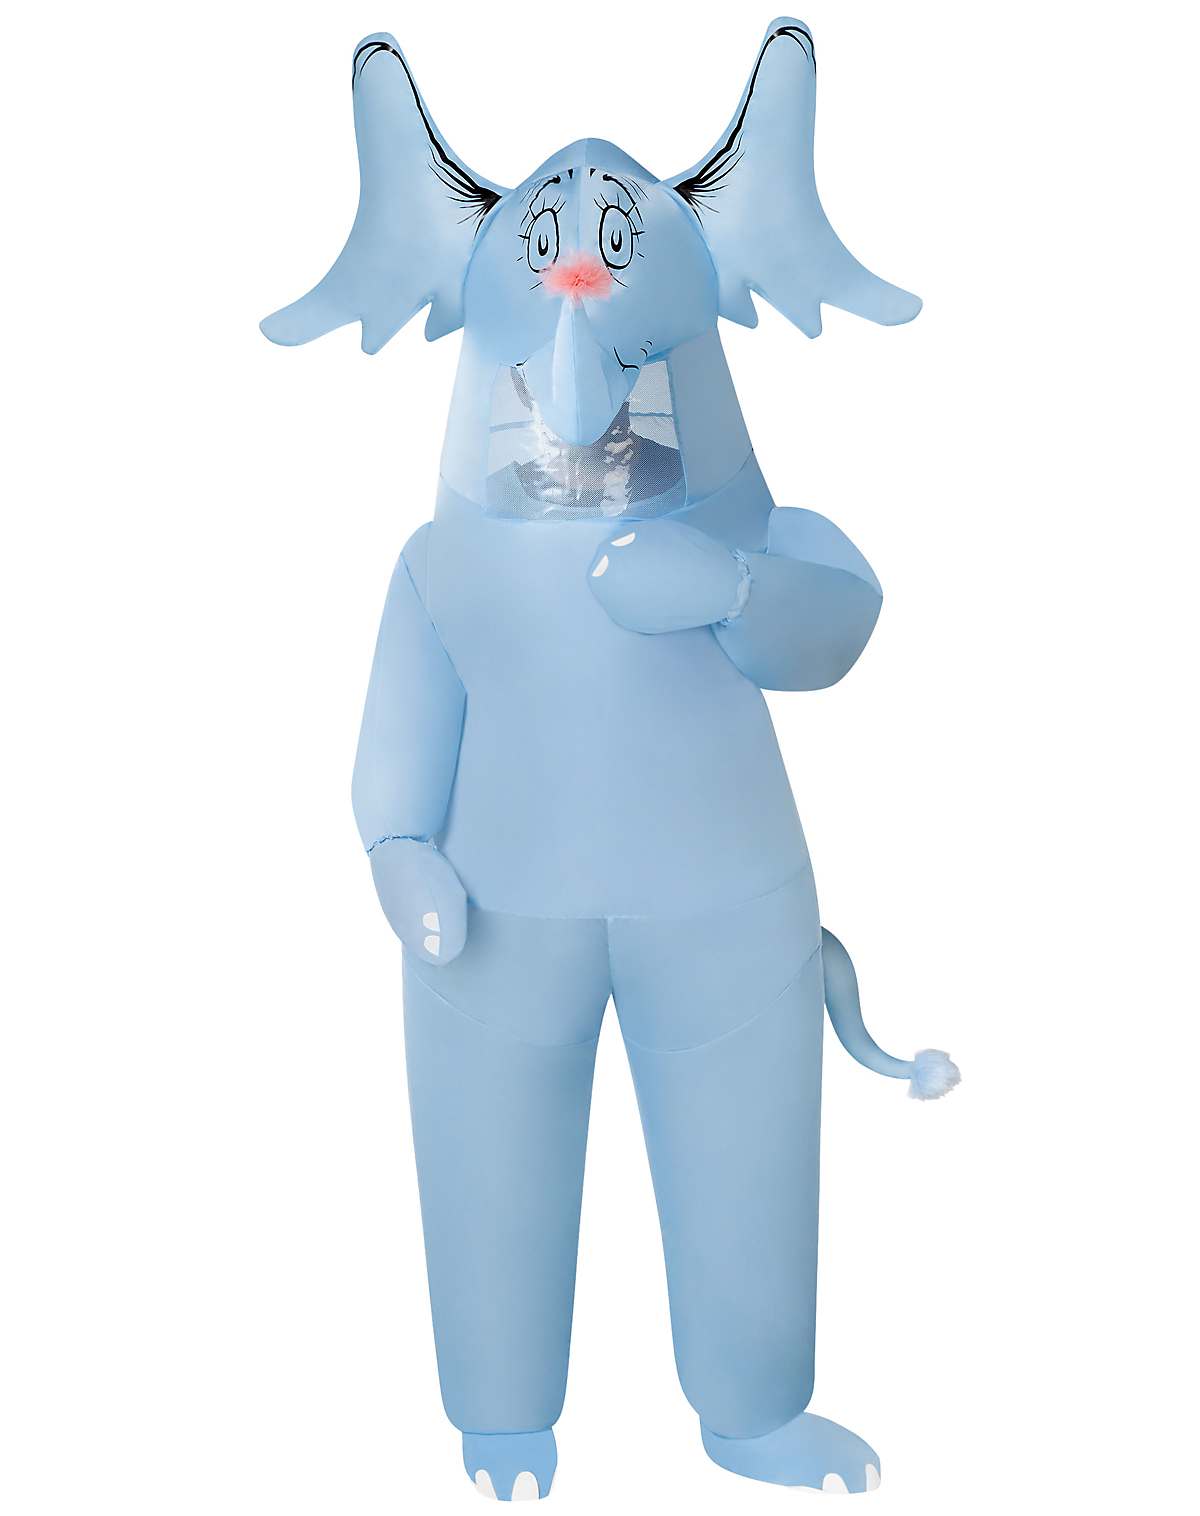 Inflatable Horton Hears a Who Costume